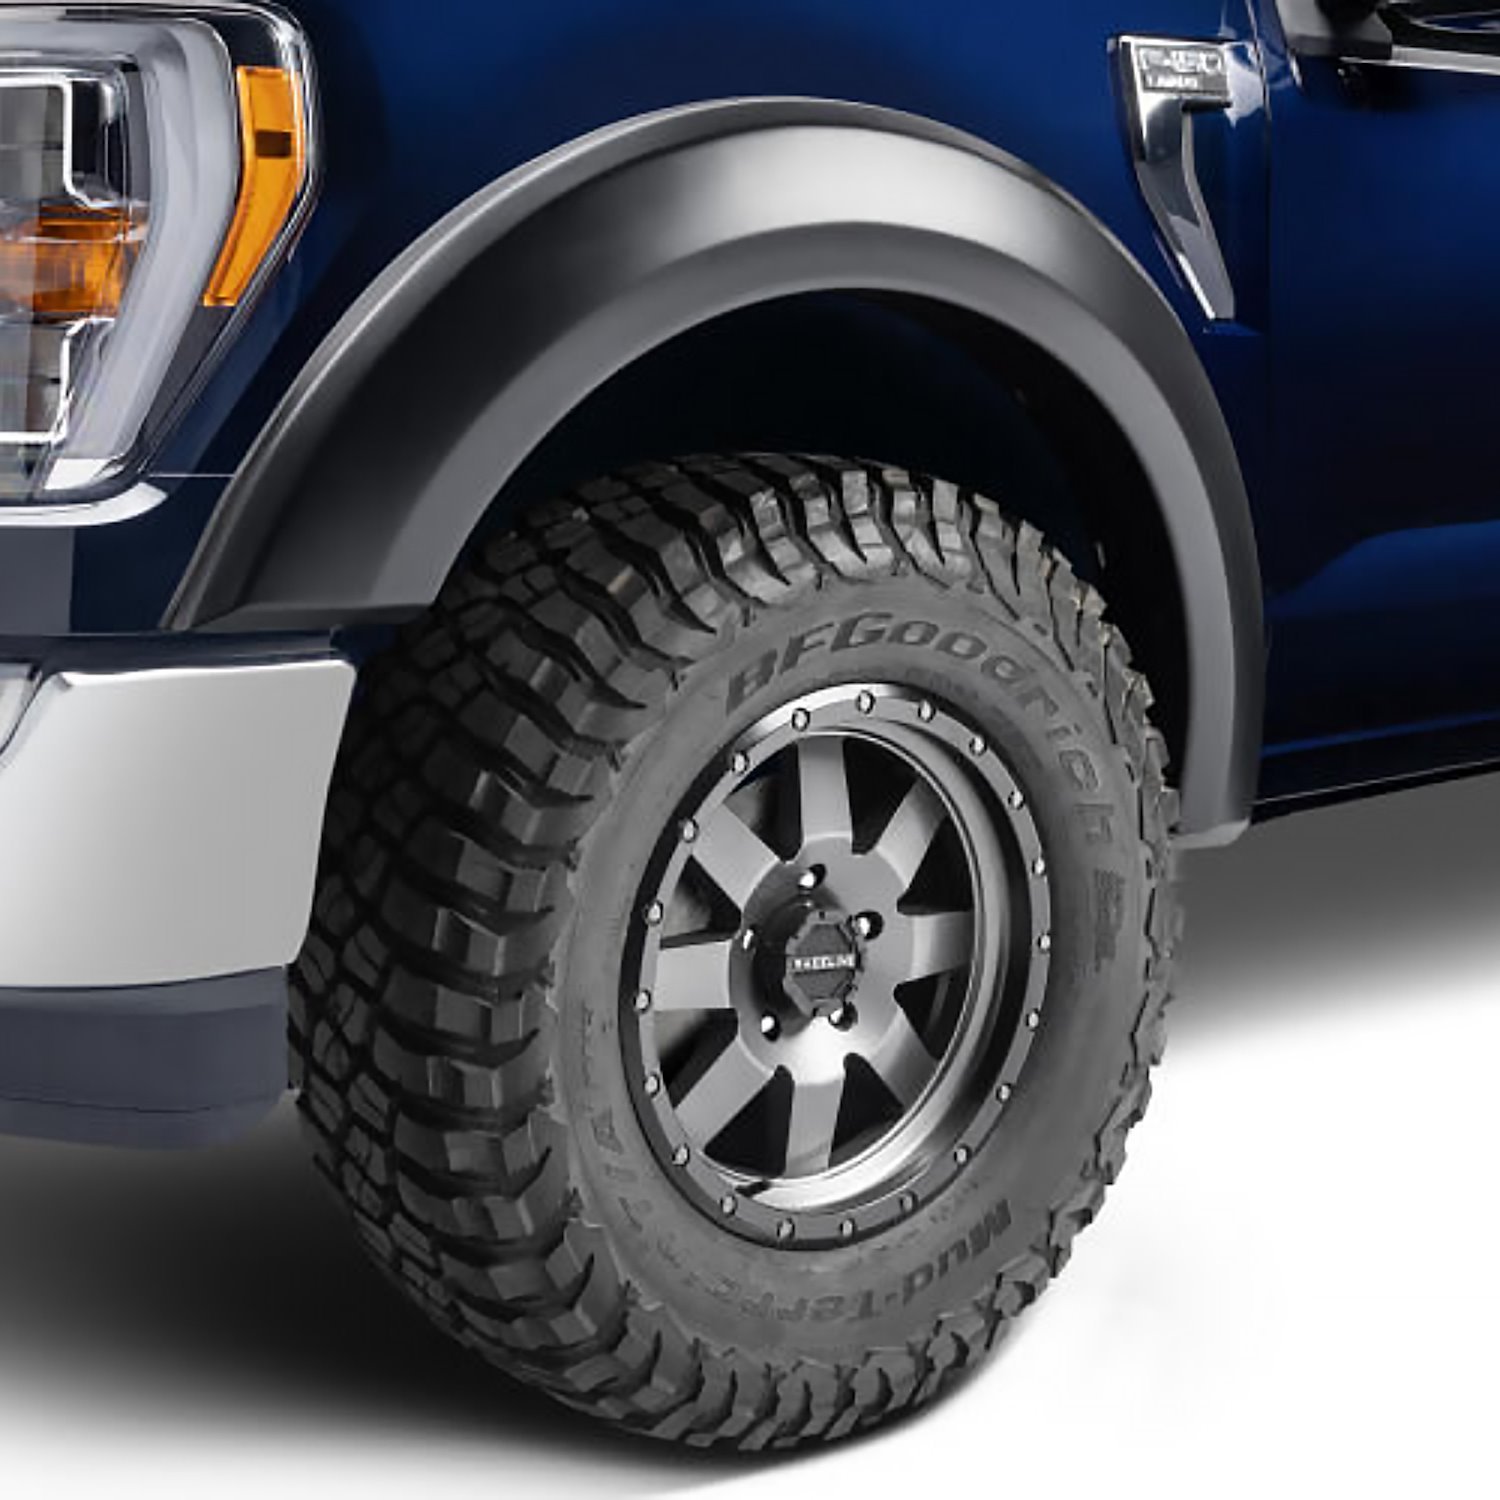 Extend-A-Fender Front Flares for Select Ford F-150 Trucks